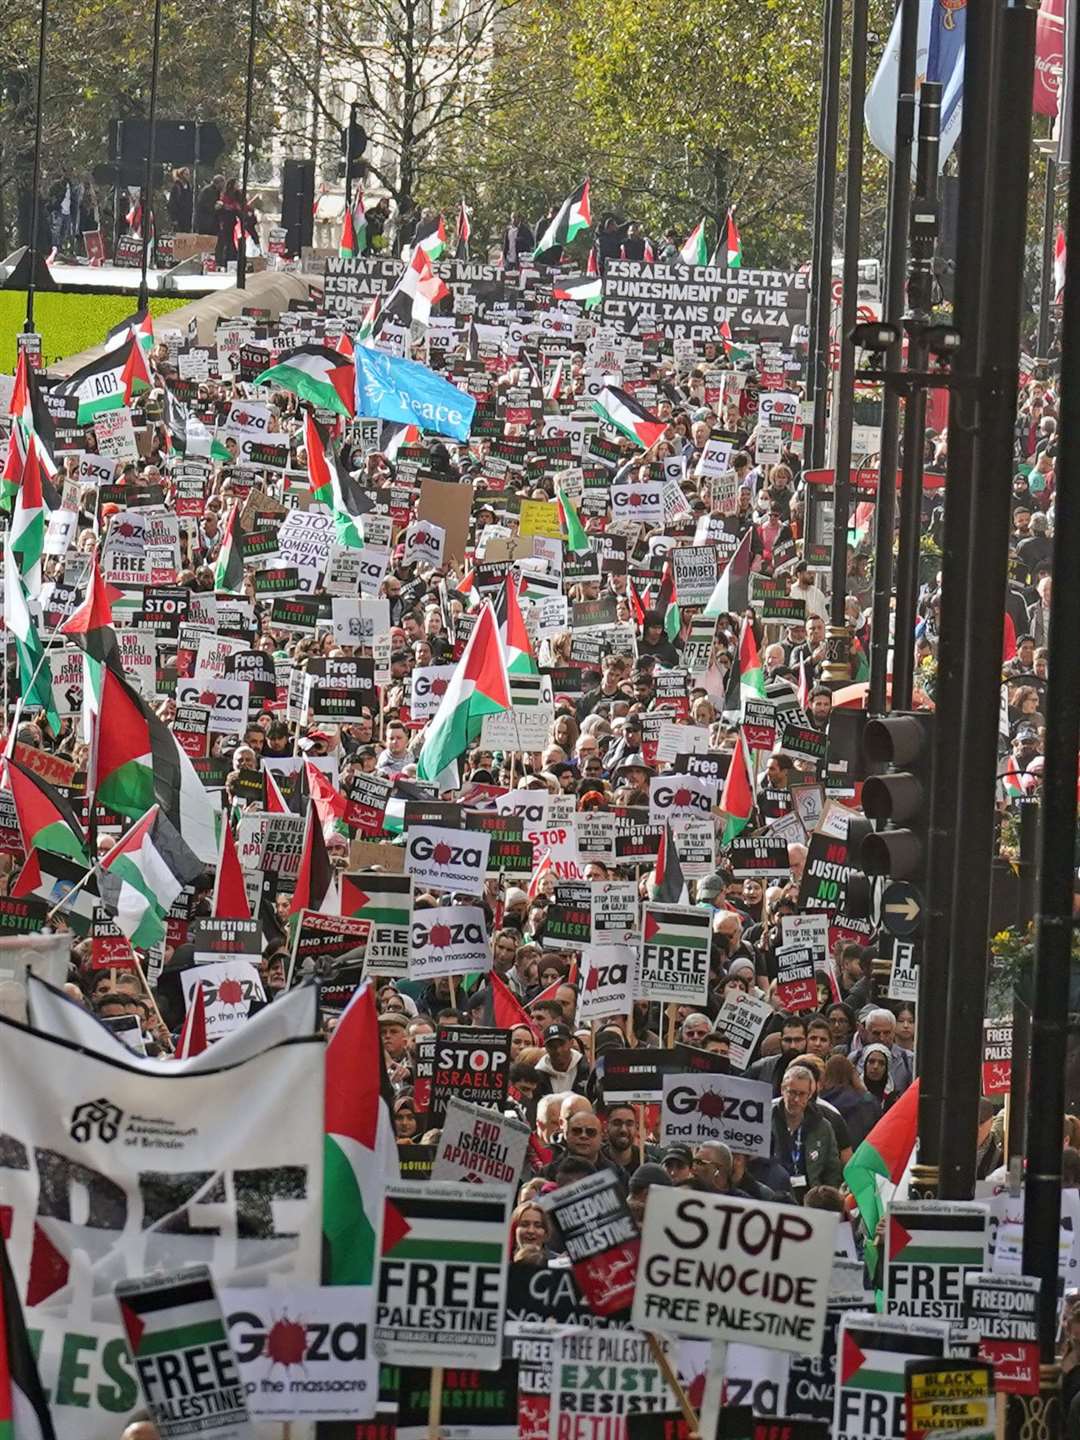 Around 100,000 people are thought to have attended a pro-Palestinian demonstration in central London (Stefan Rousseau/PA)